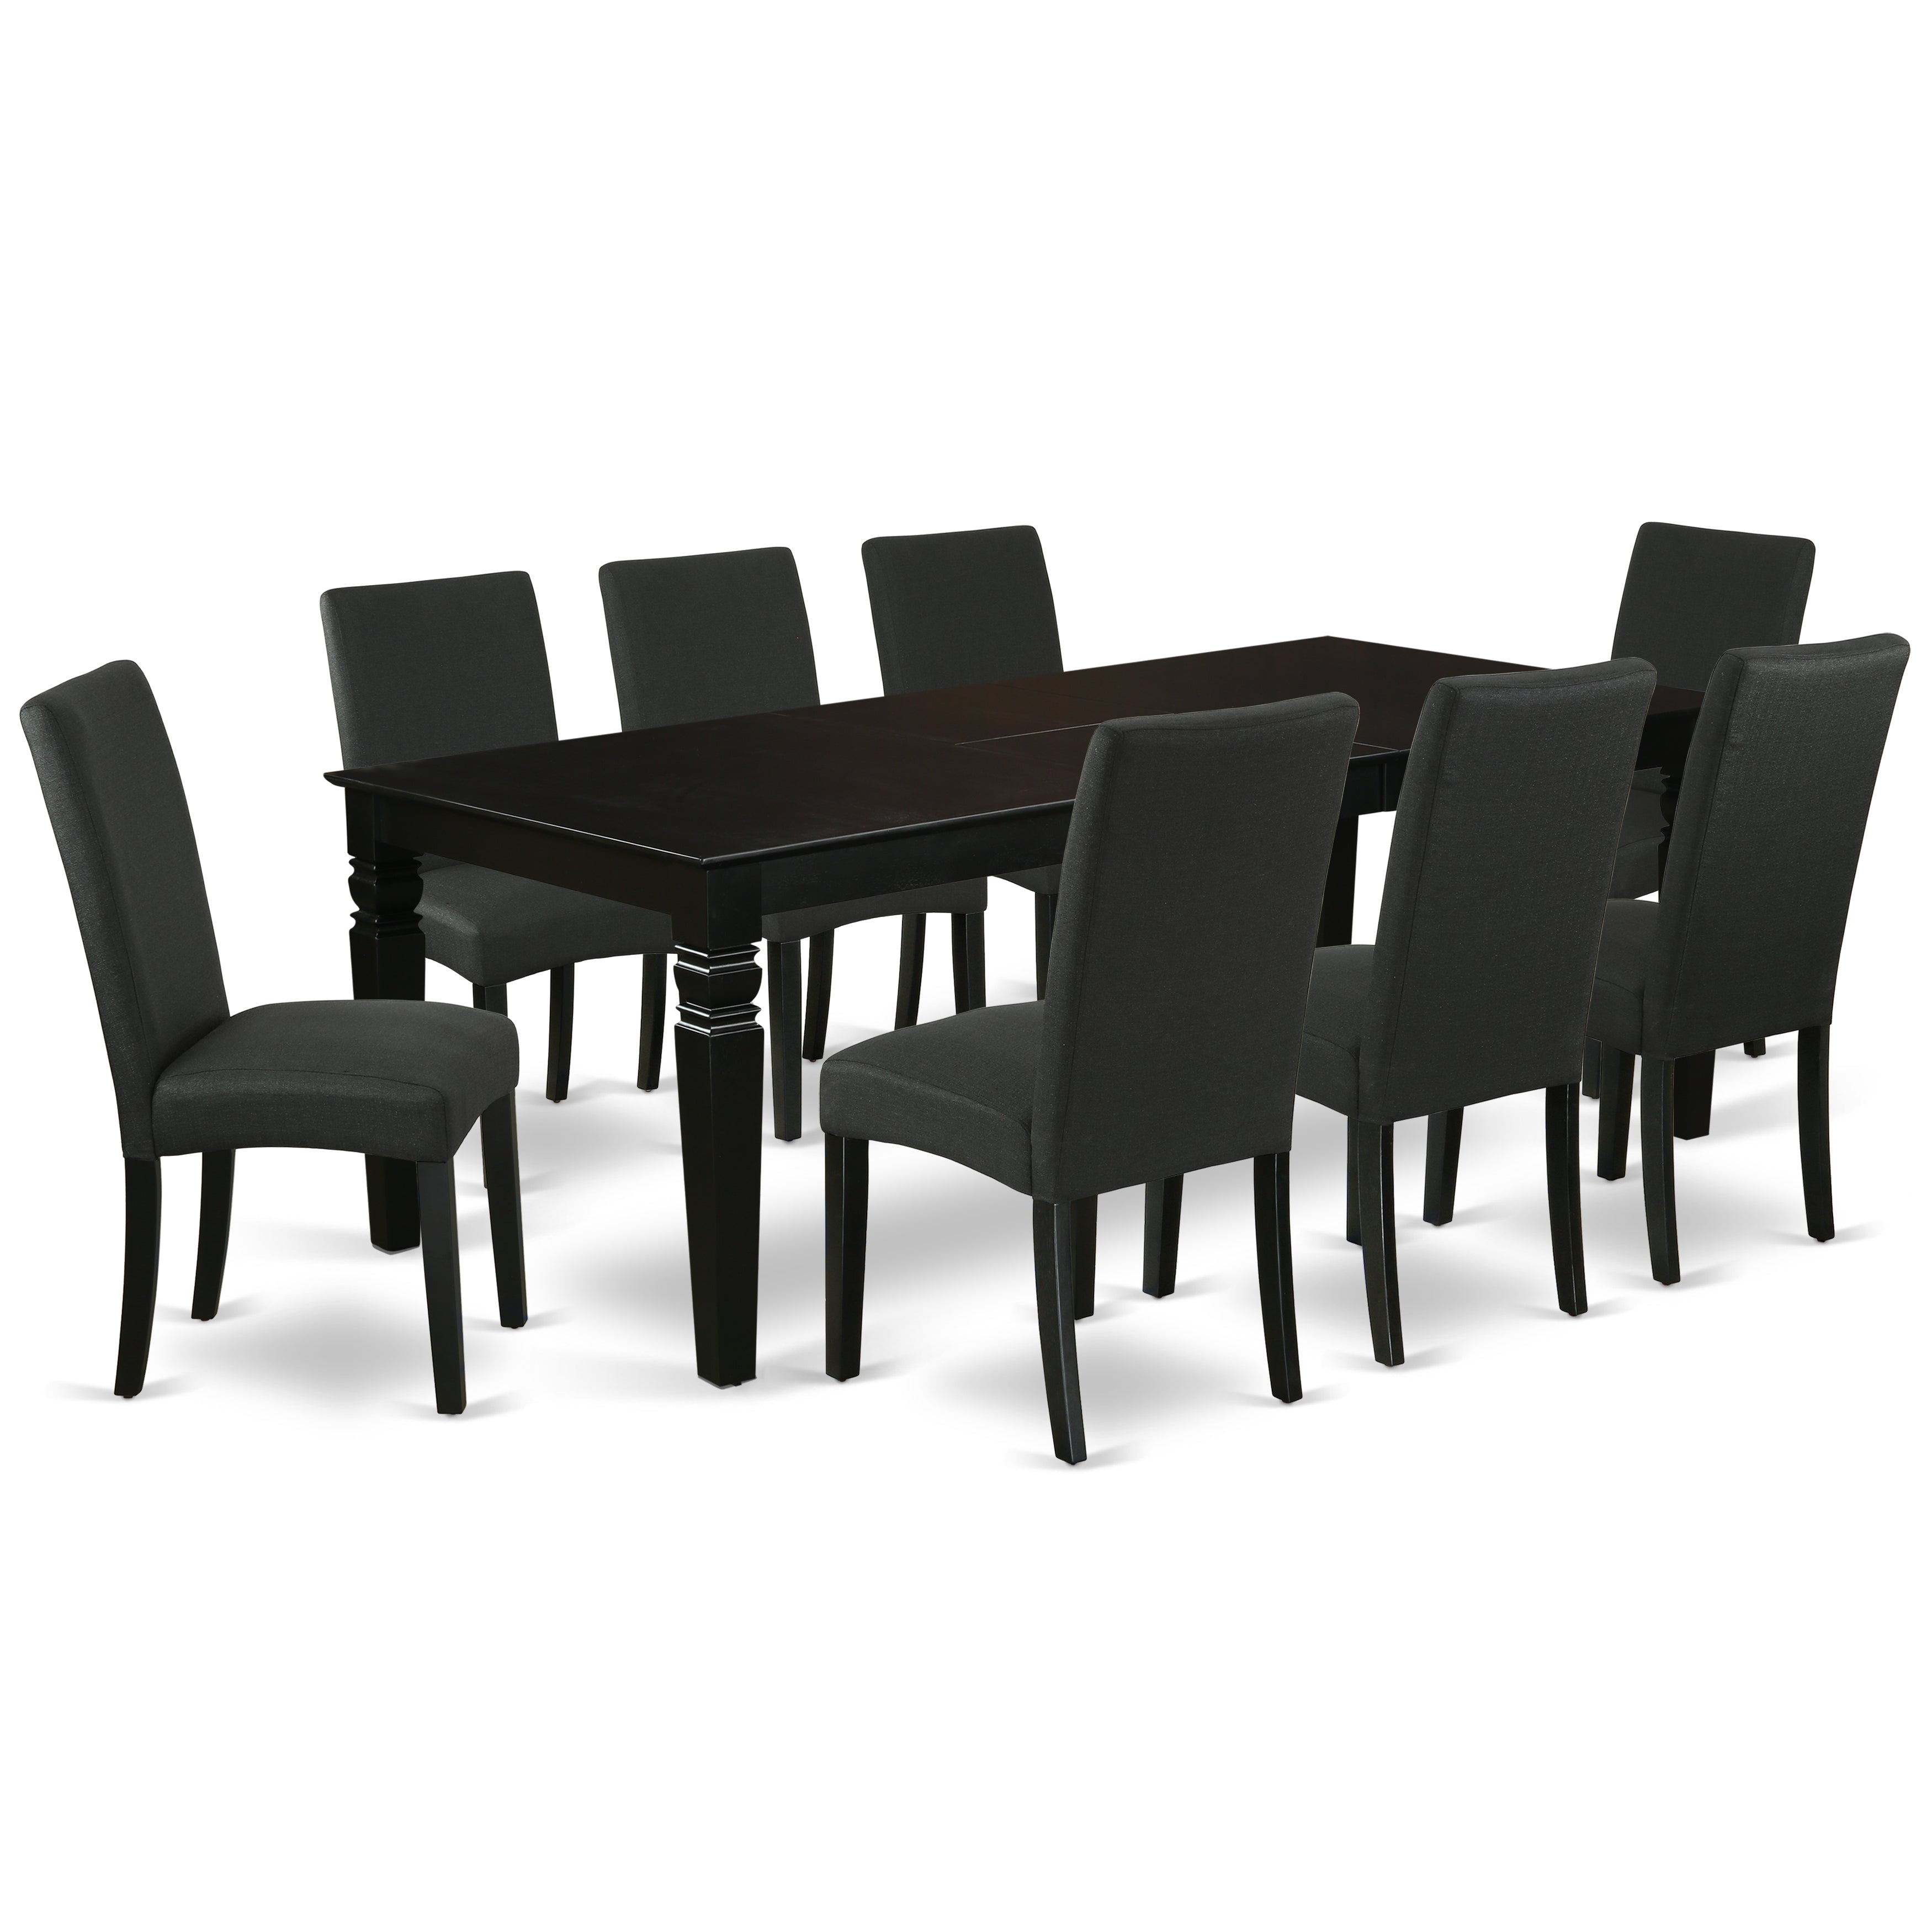 Logan 9 PC 84" Traditional Dining room Table With Leaf And Parson Chairs Set in Black